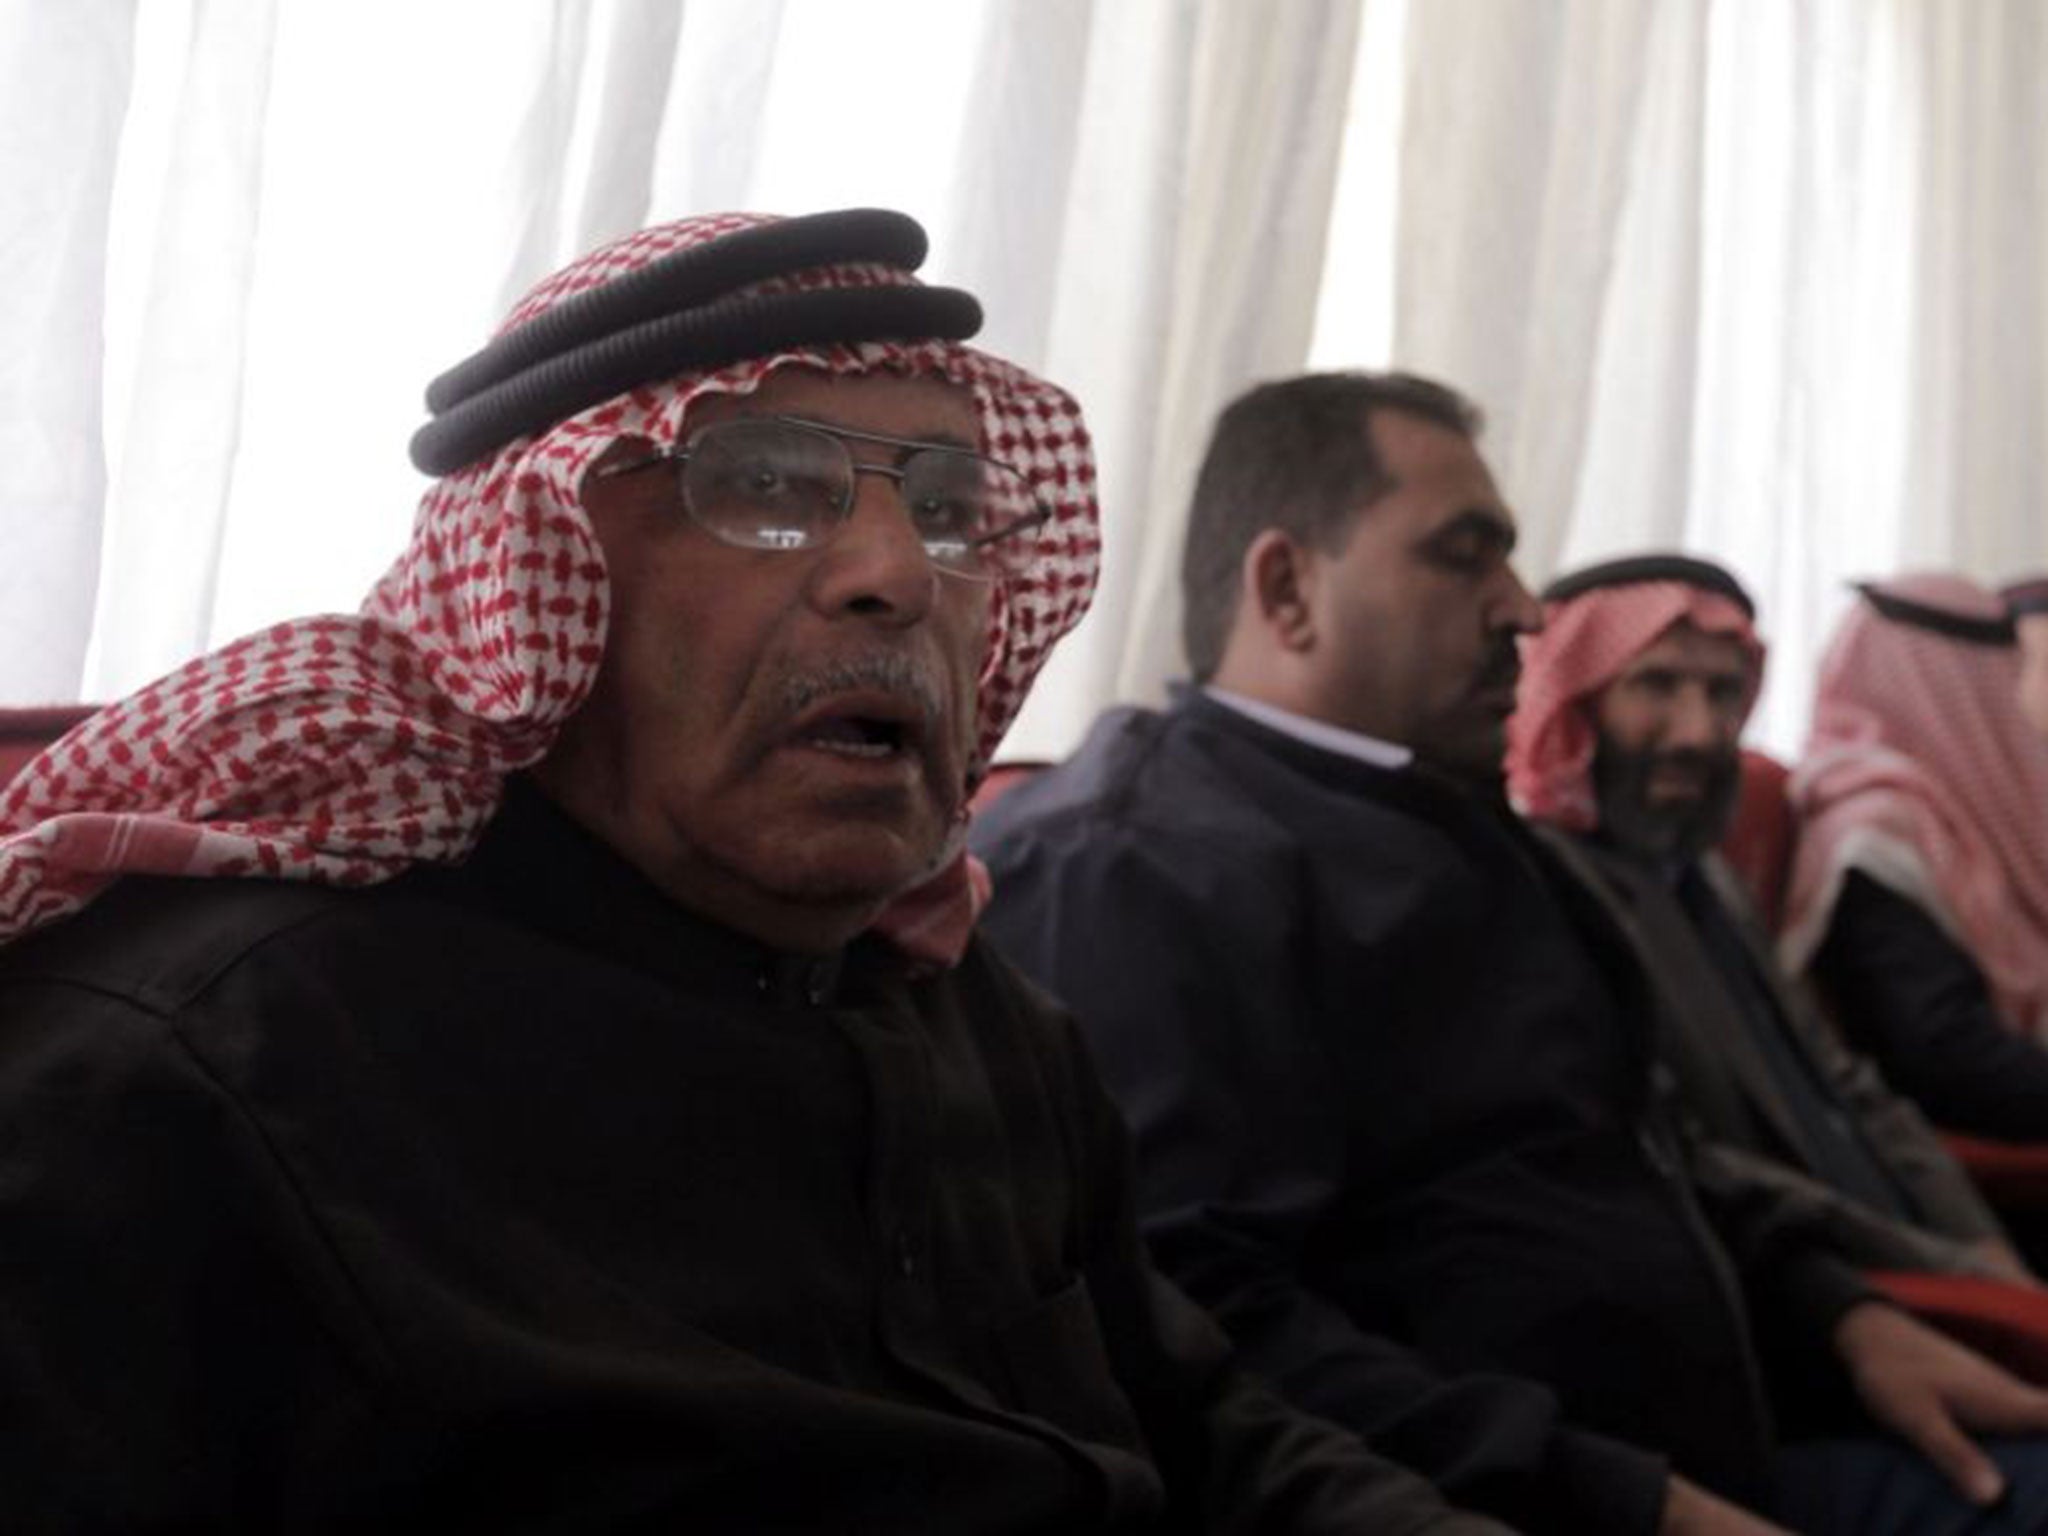 Safi al-Kassasbeh, the father of the Jordanian pilot killed by Isis militants, greets mourners who turned up to offer their condolences on 4 February , 2015